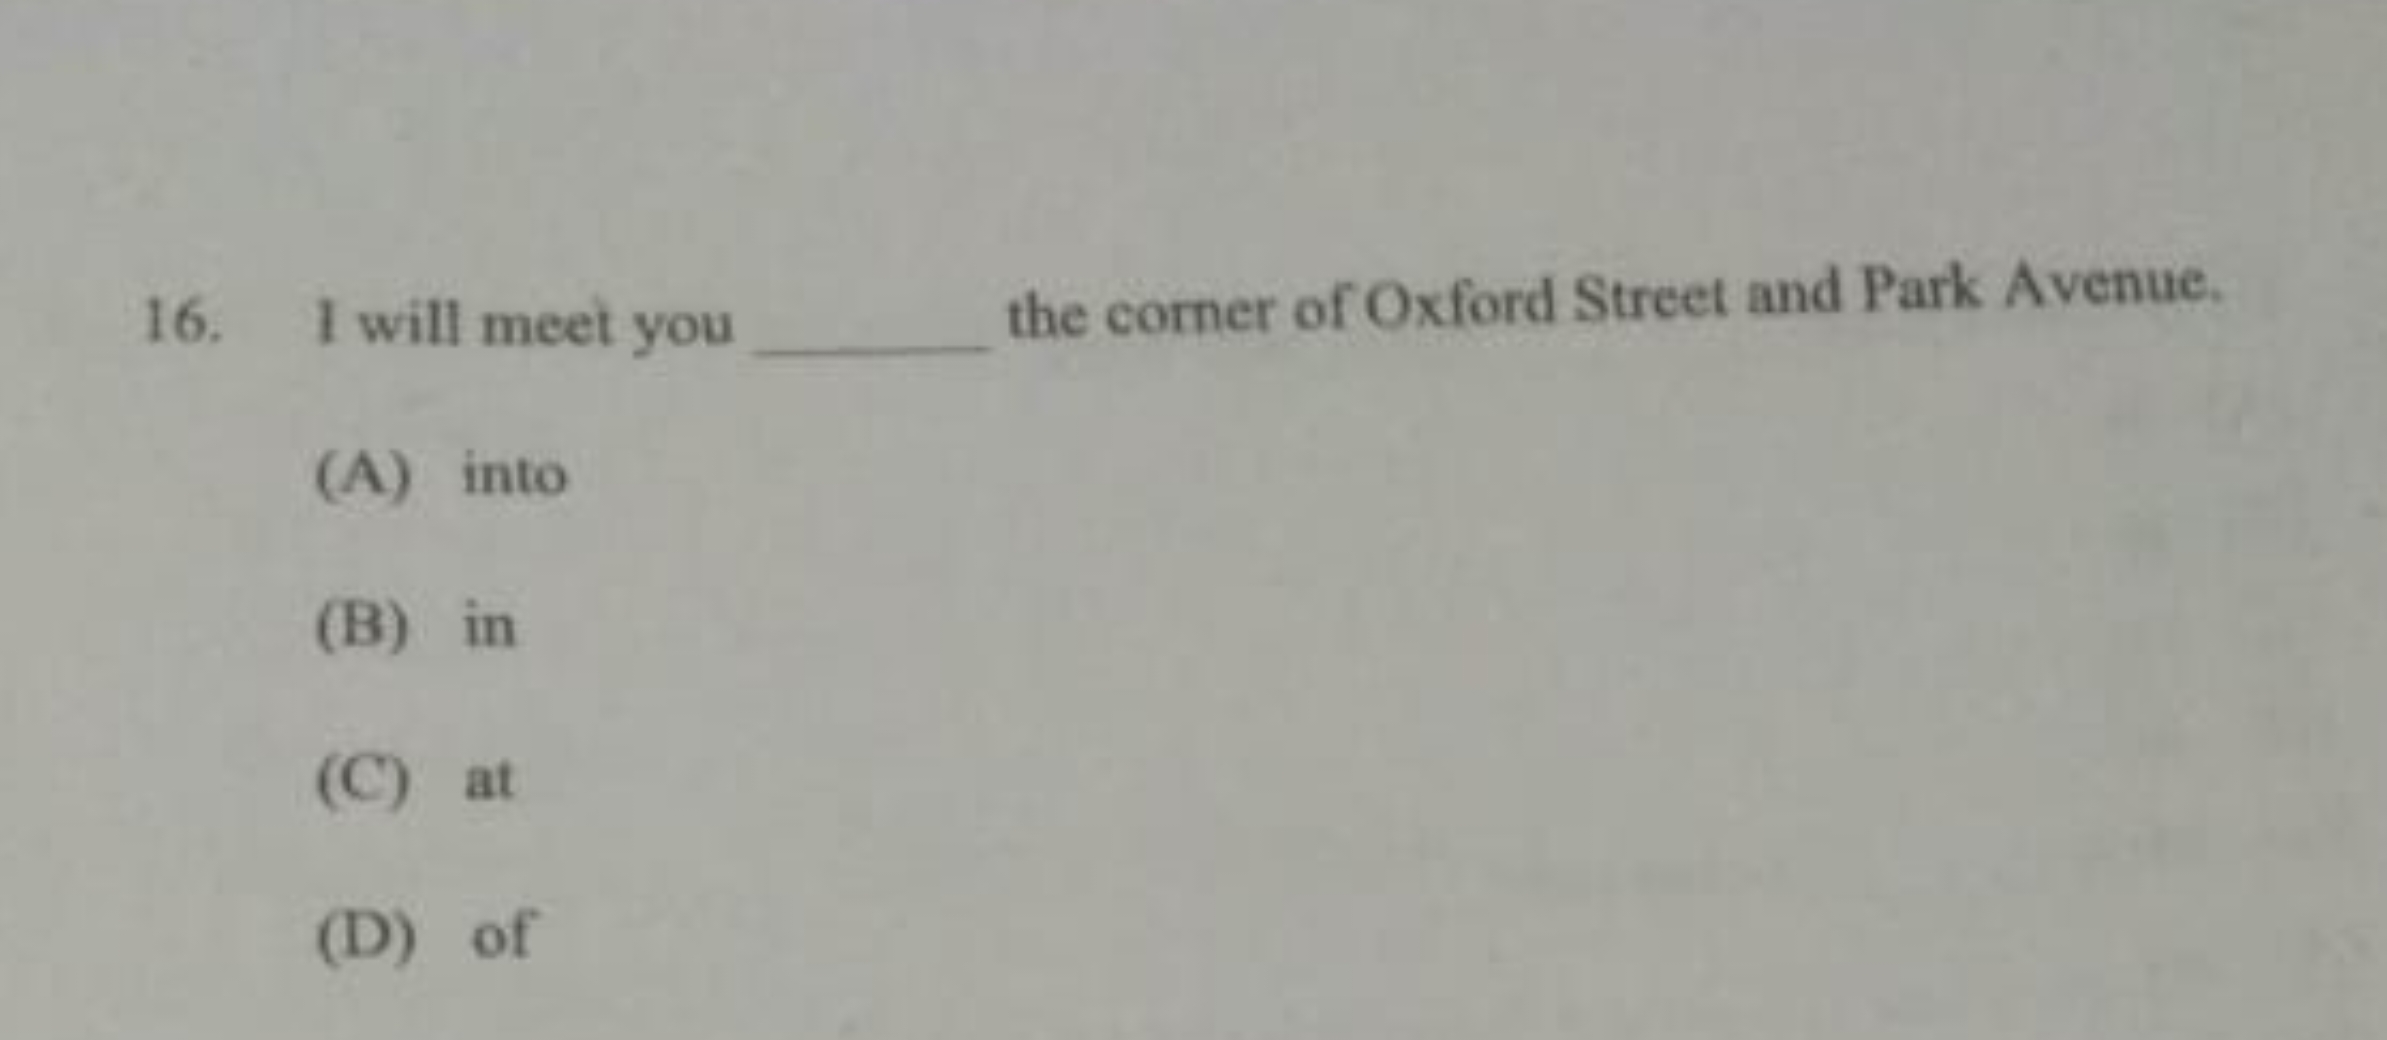 16. I will meet you the comer of Oxford Street and Park Avenue.
(A) in